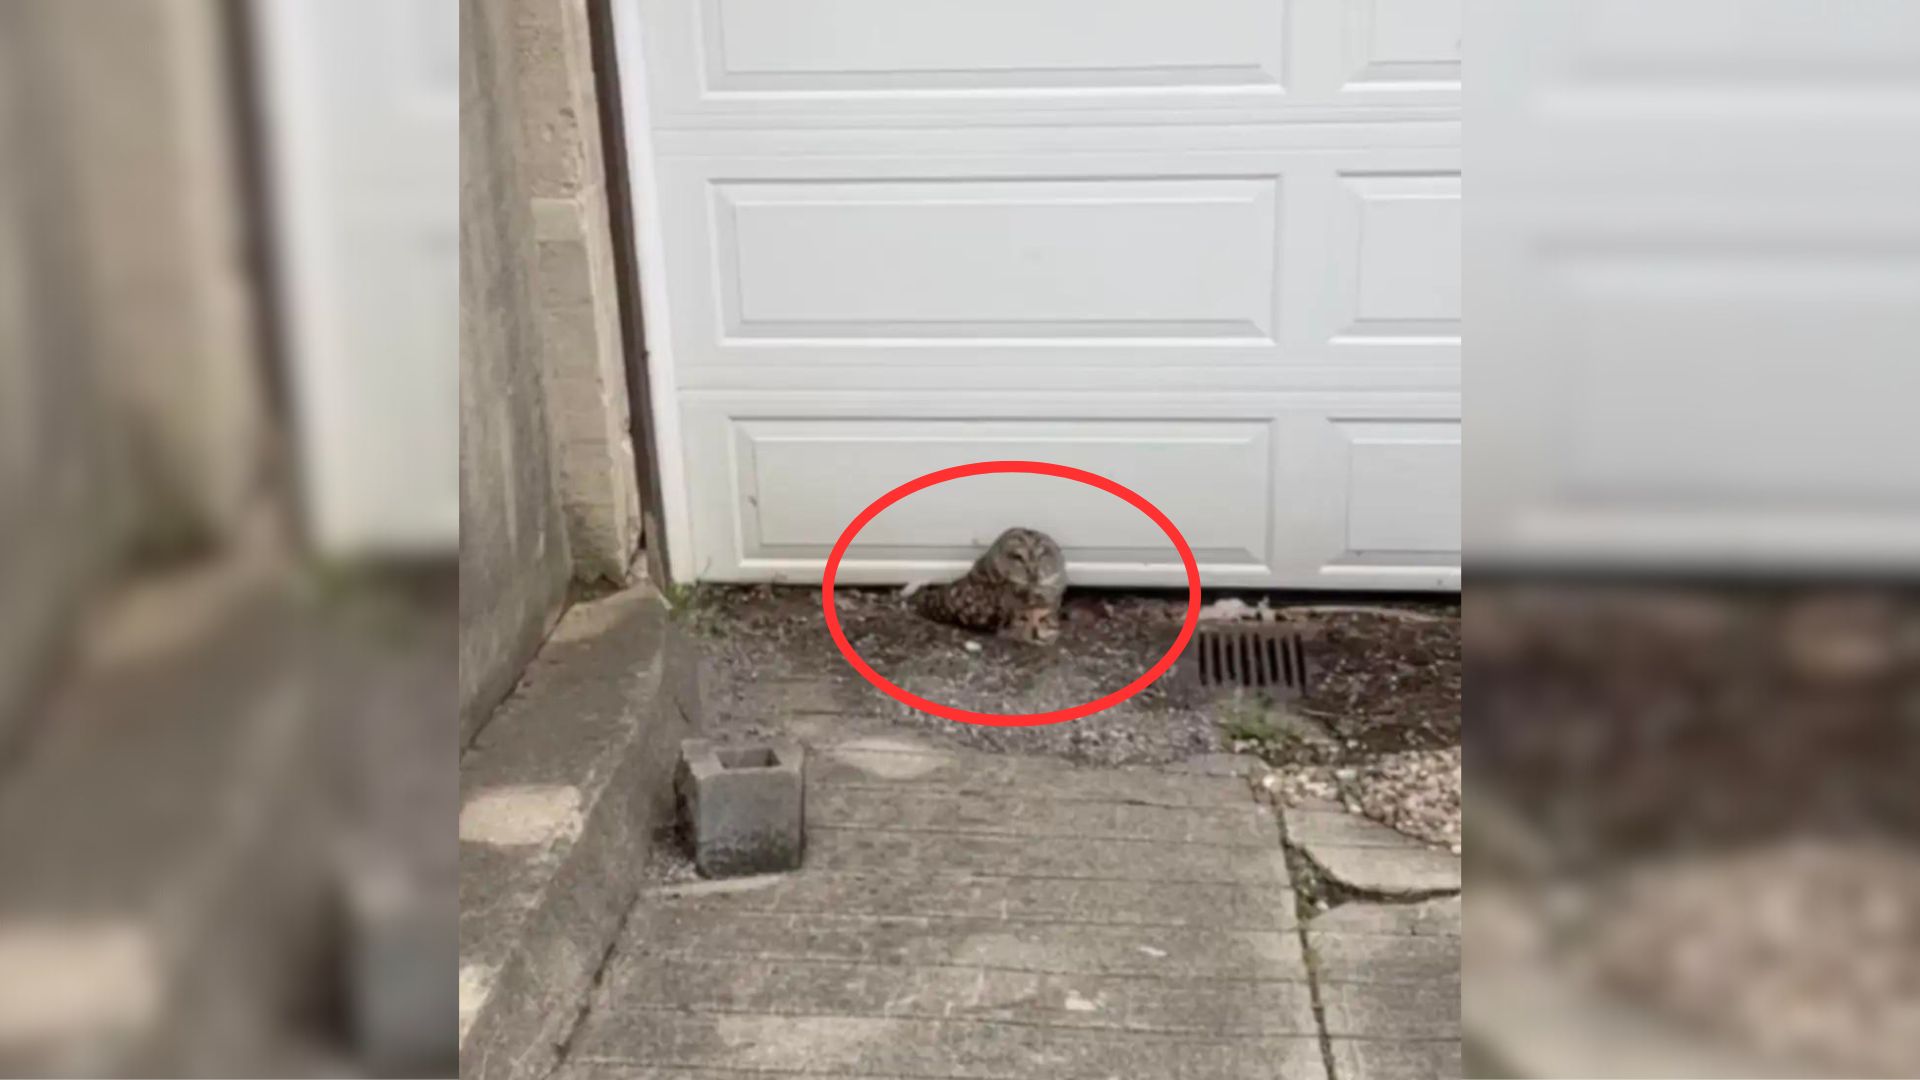 Ohio Plumber Was Shocked When He Realized That A Feathery Clump Had A Pair Of Glowing Eyes